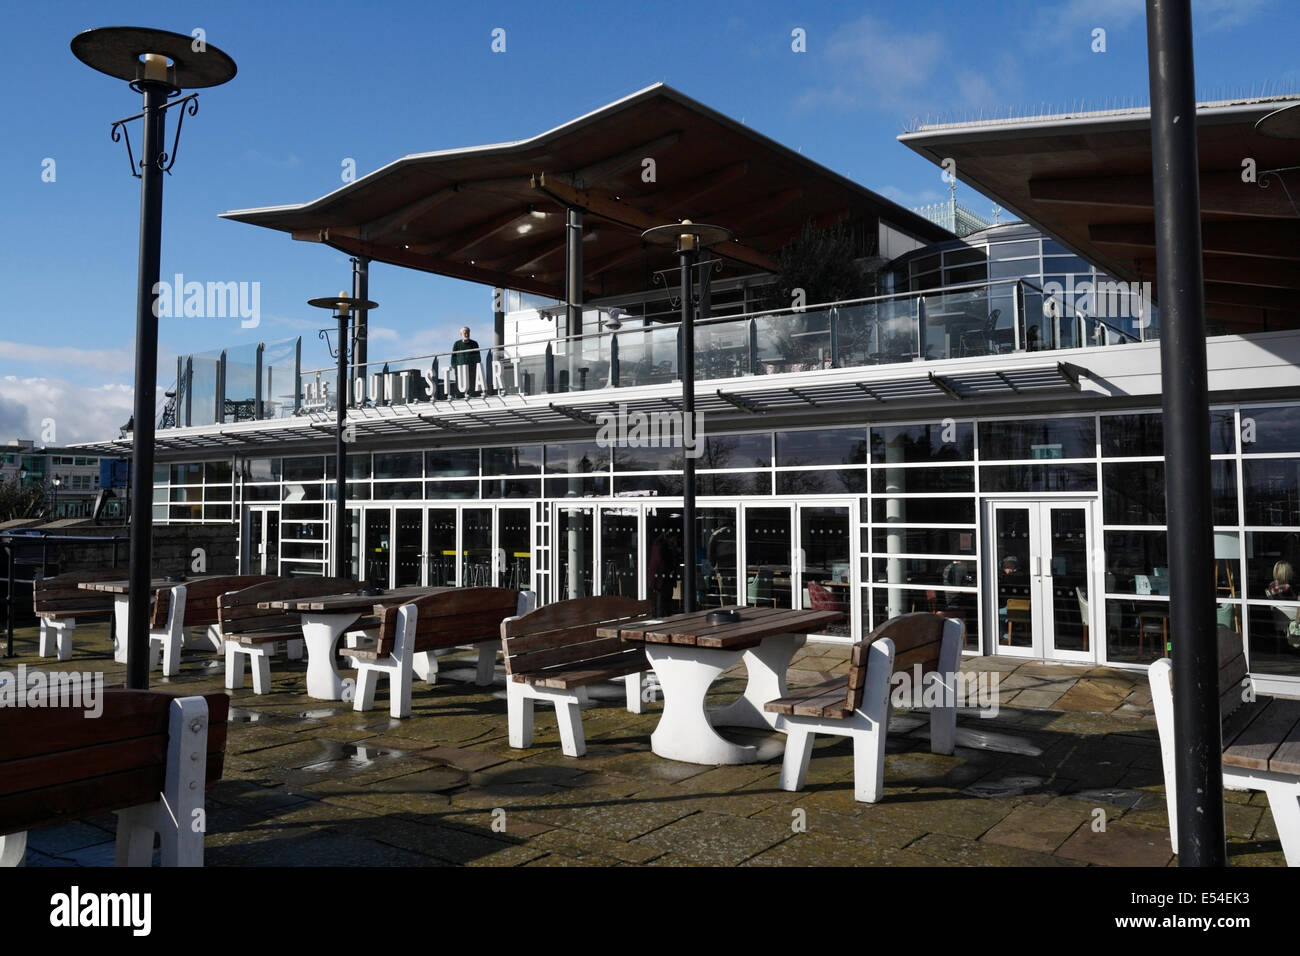 The Mount Stuart Wetherspoons pub in Cardiff Bay Wales Stock Photo